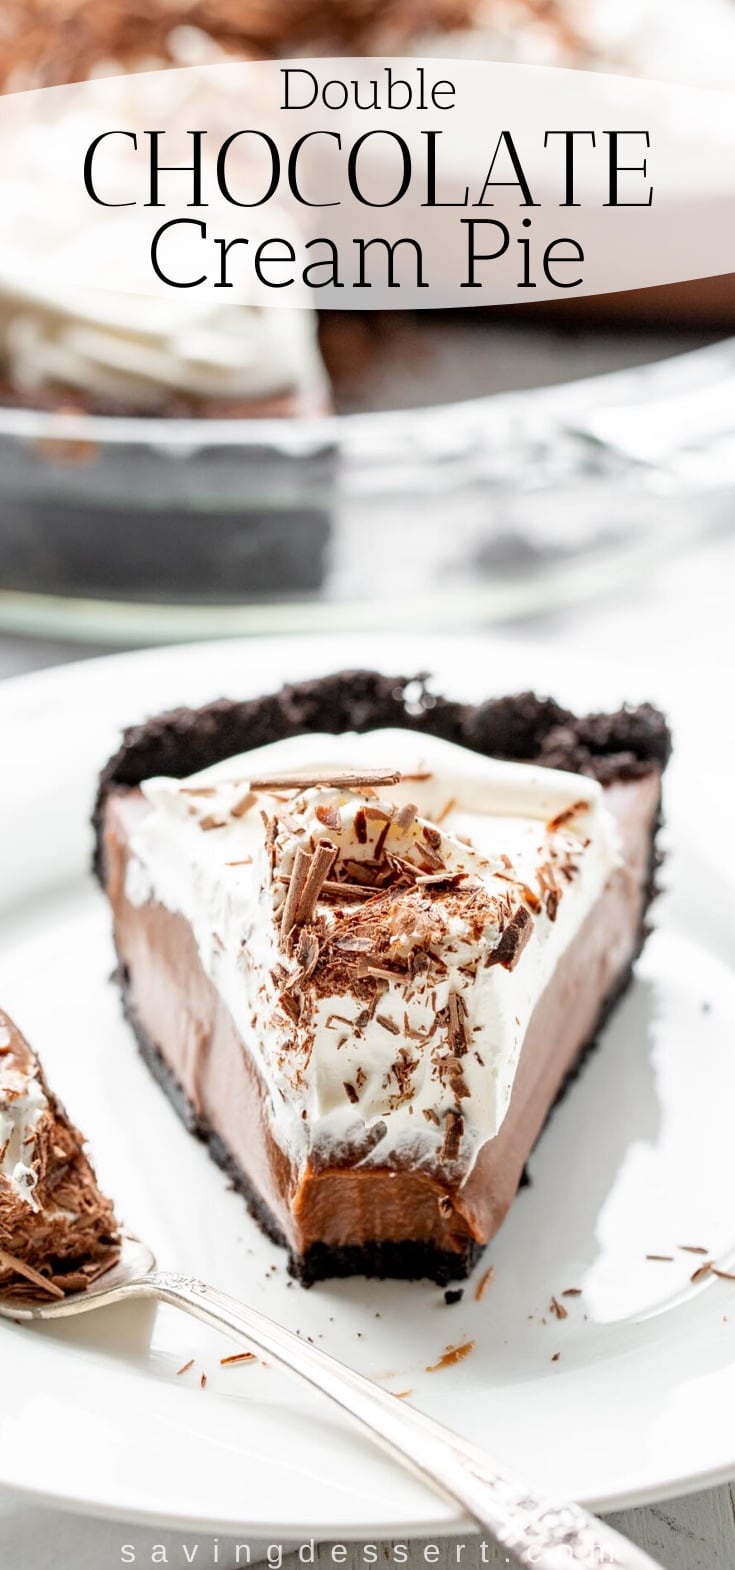 A slice of chocolate cream pie with a chocolate crust and topped with shaved chocolate and whipped cream